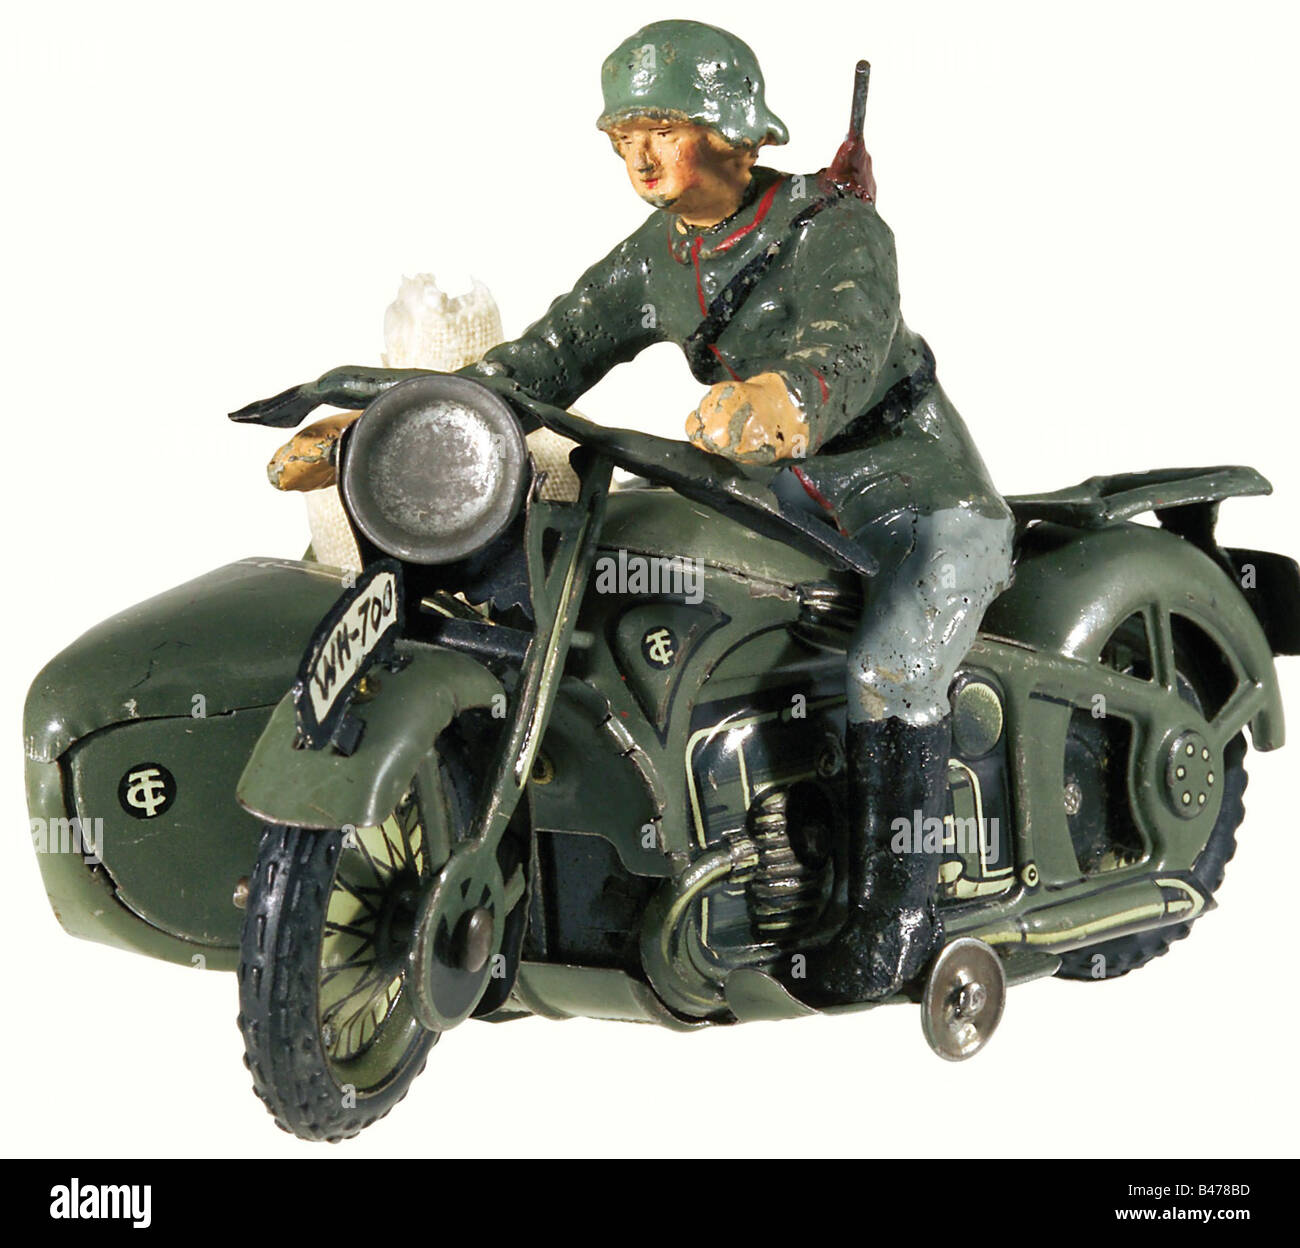 A motorcycle/sidecar combination, by the Tipp-Co. Company. Field grey lacquered/lithographed, full sheet metal version with rubber tires, moveable front wheel, functioning clockwork drive and parking brake. Motorcycle and sidecar have wire hook connectors. The motorcyclist (composition material) has a steel helmet and slung rifle. There is a mailbag in the sidecar. Dimensions: Length 14, Width 8, Height 5.5 cm. The number plates, the steering bar instruments, and the load carrier have been repainted in colour. Very rare sheet metal toy by the manufacturer Tipp-, Stock Photo